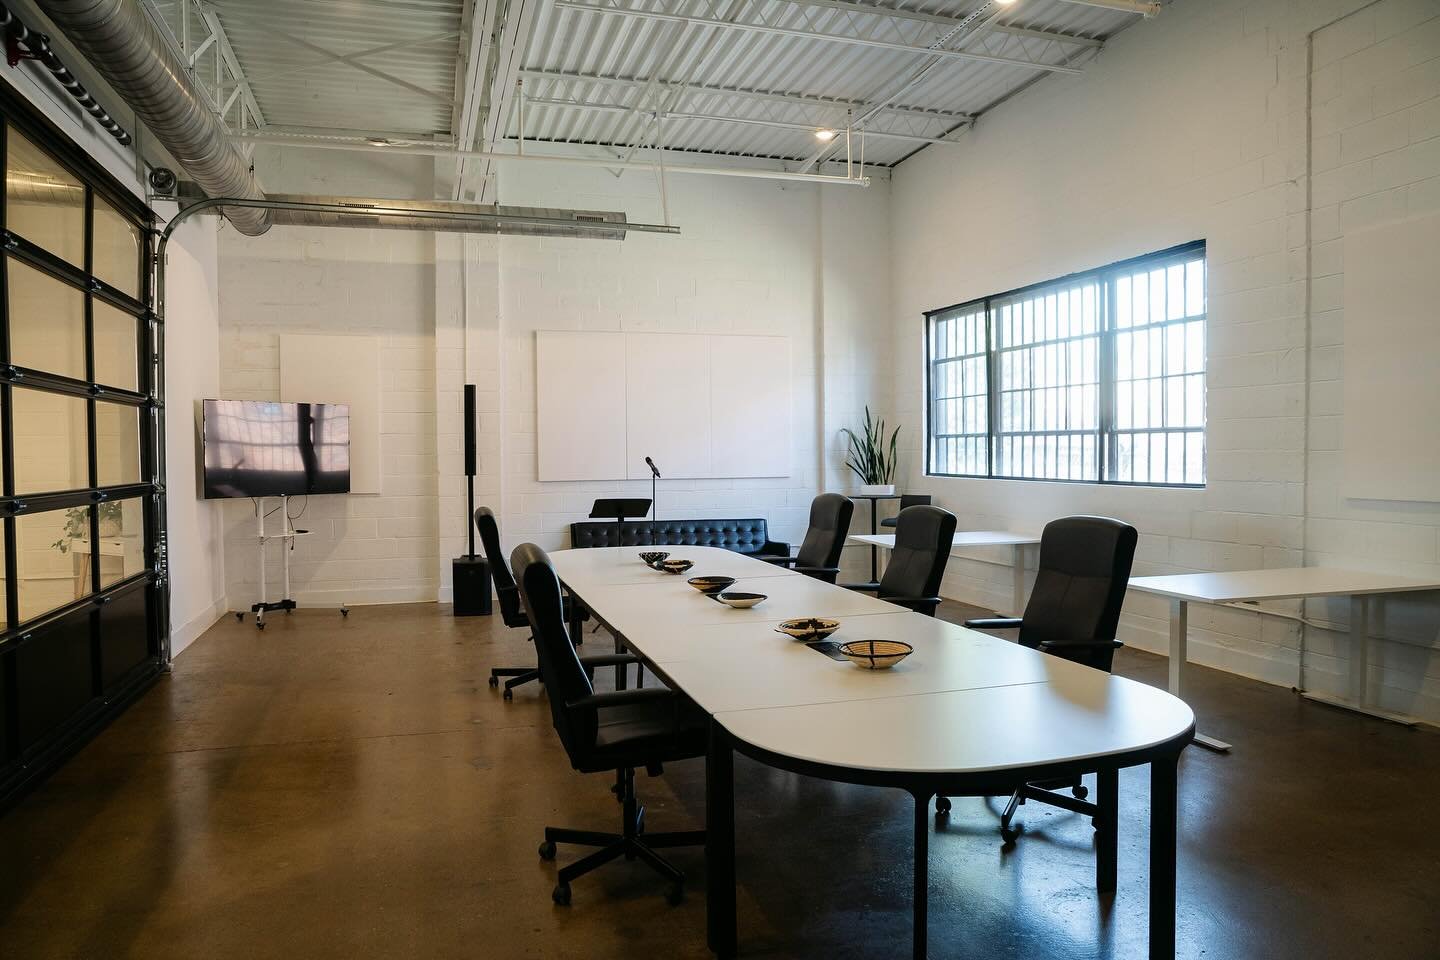 We have rental space available for your important business meetings or team-building get togethers. Go to our website or contact us for more info.

#coalescencecoffee